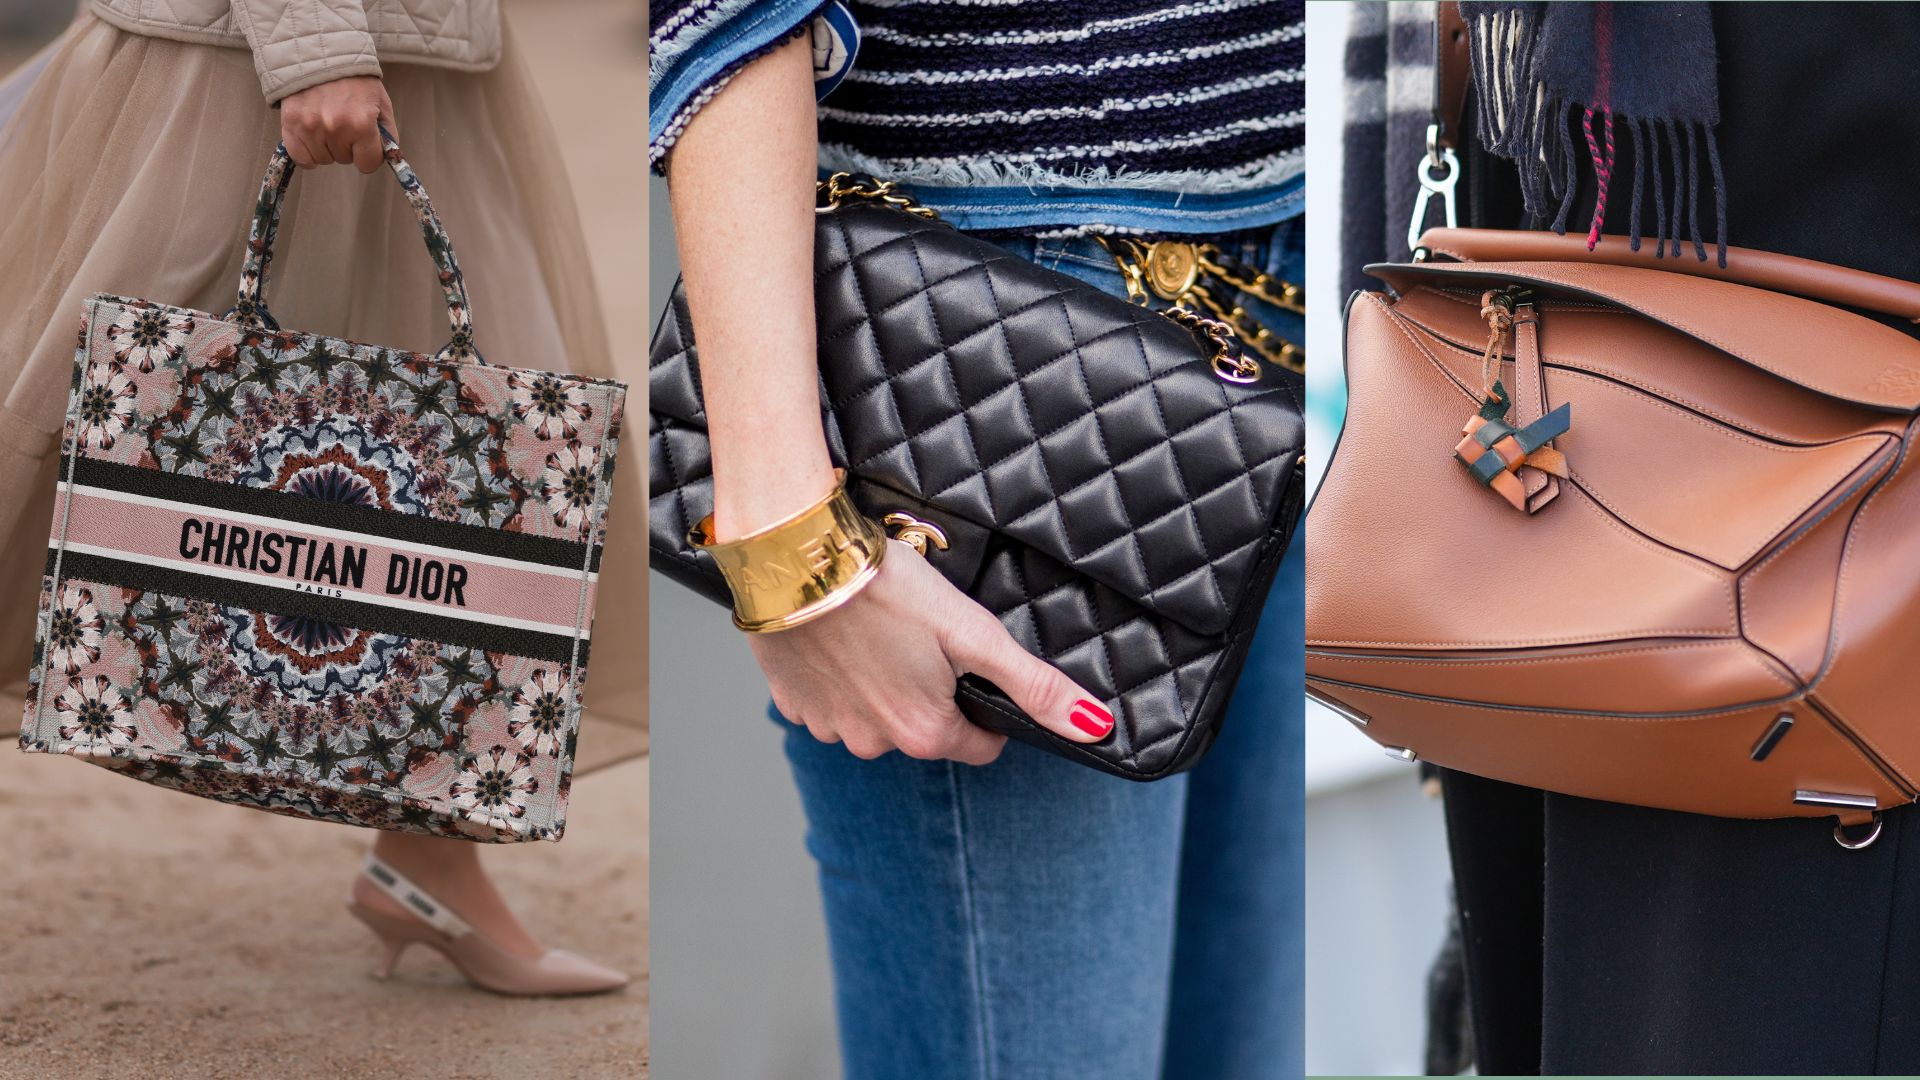 The best designer bags worth investing in: These luxury handbags